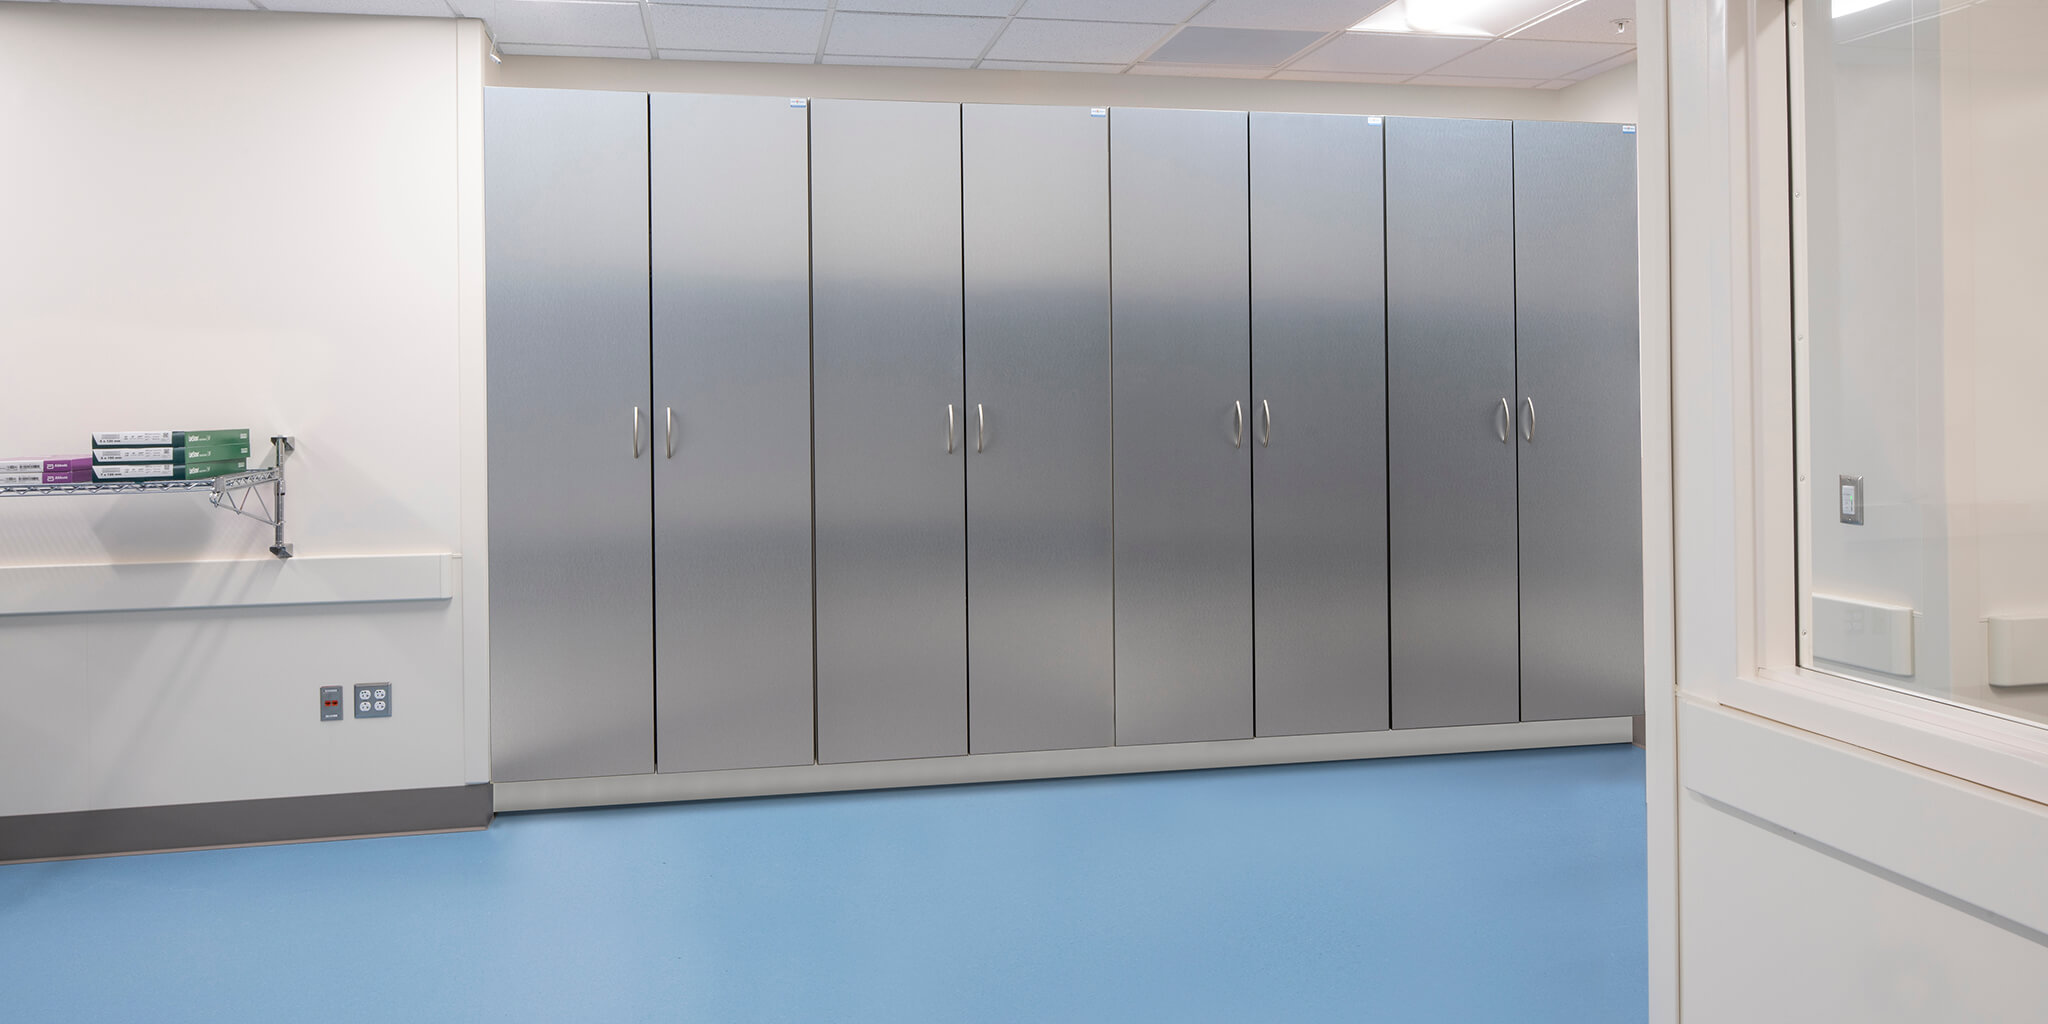 Evolve Stainless Steel Cabinets